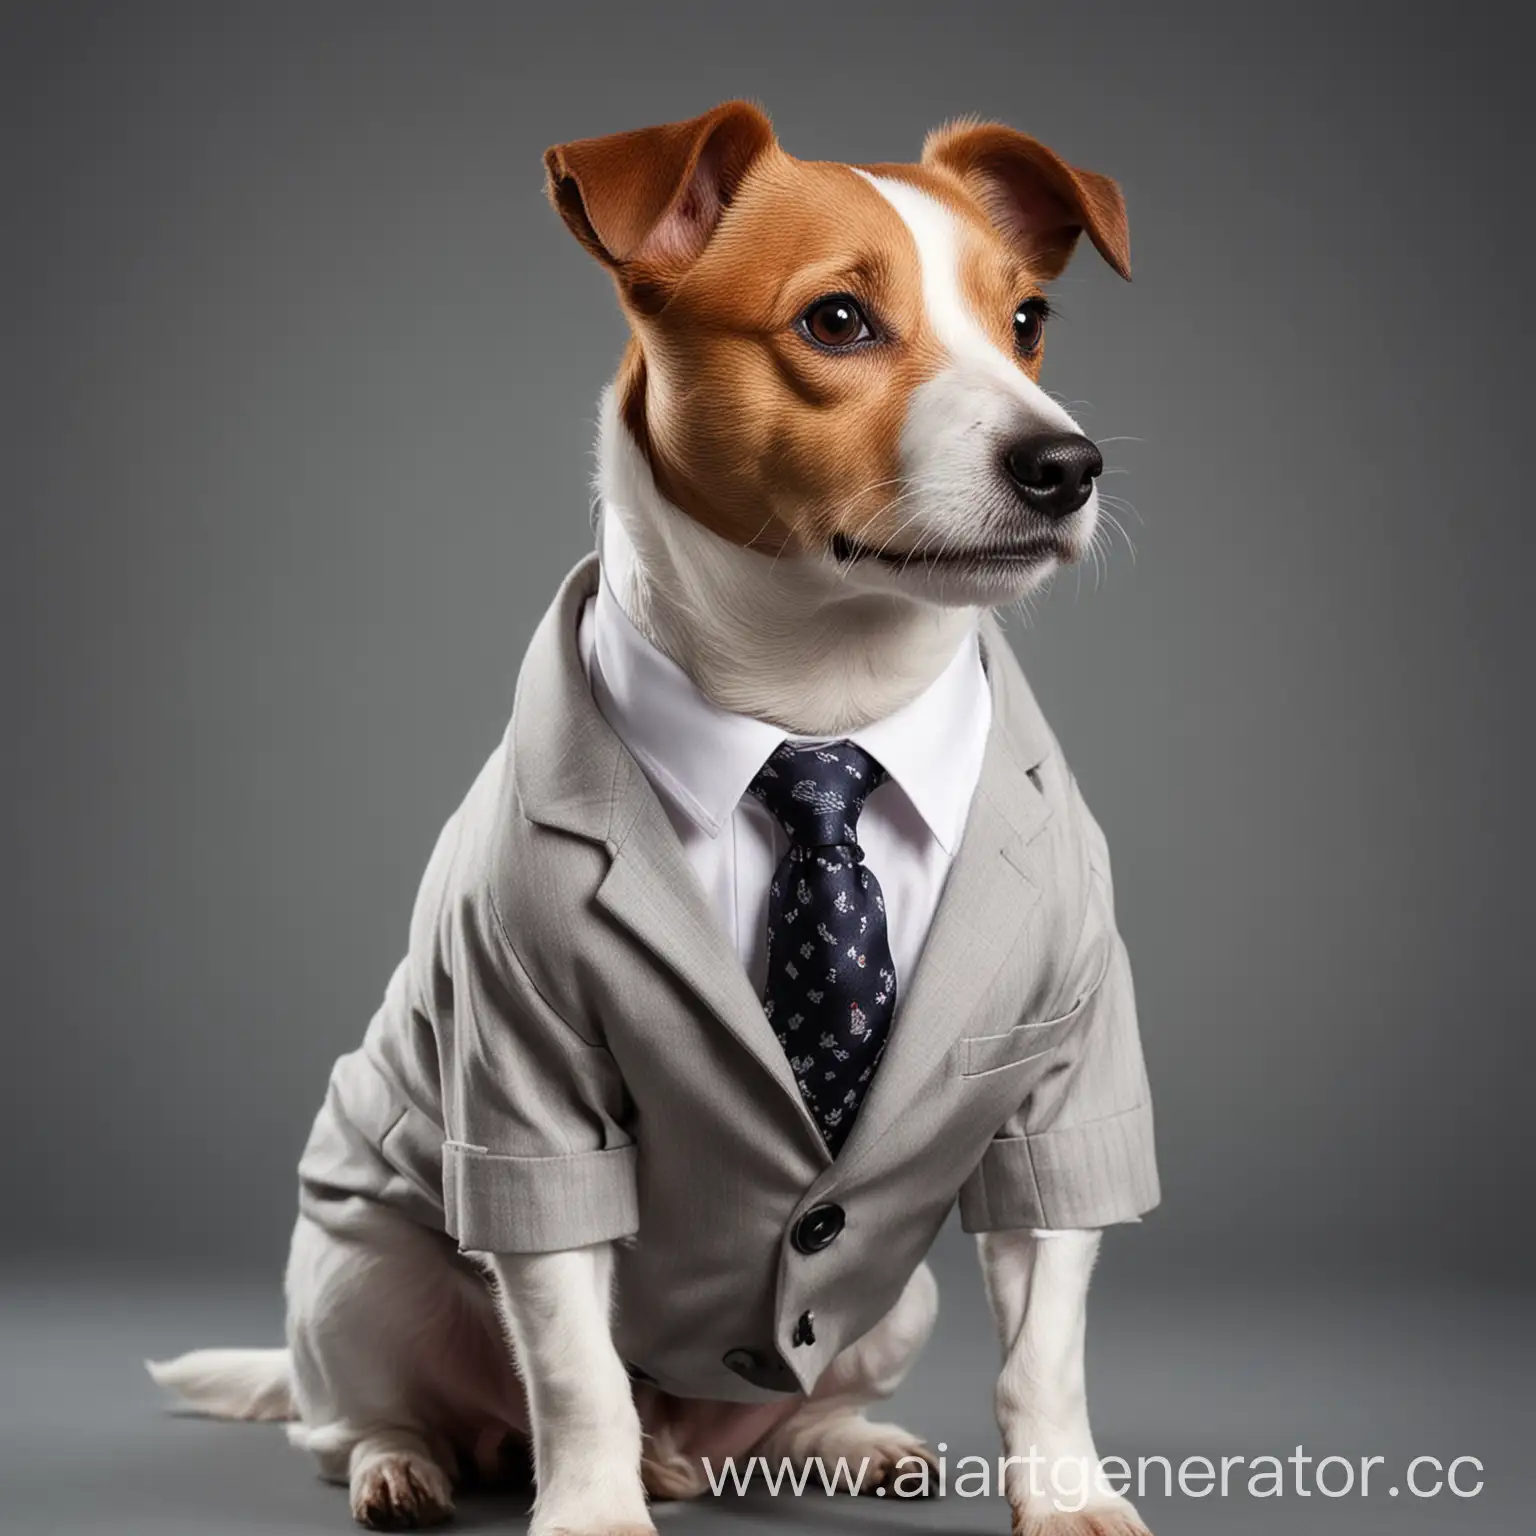 Jack-Russell-Terrier-Dog-Dressed-in-Professional-Business-Attire